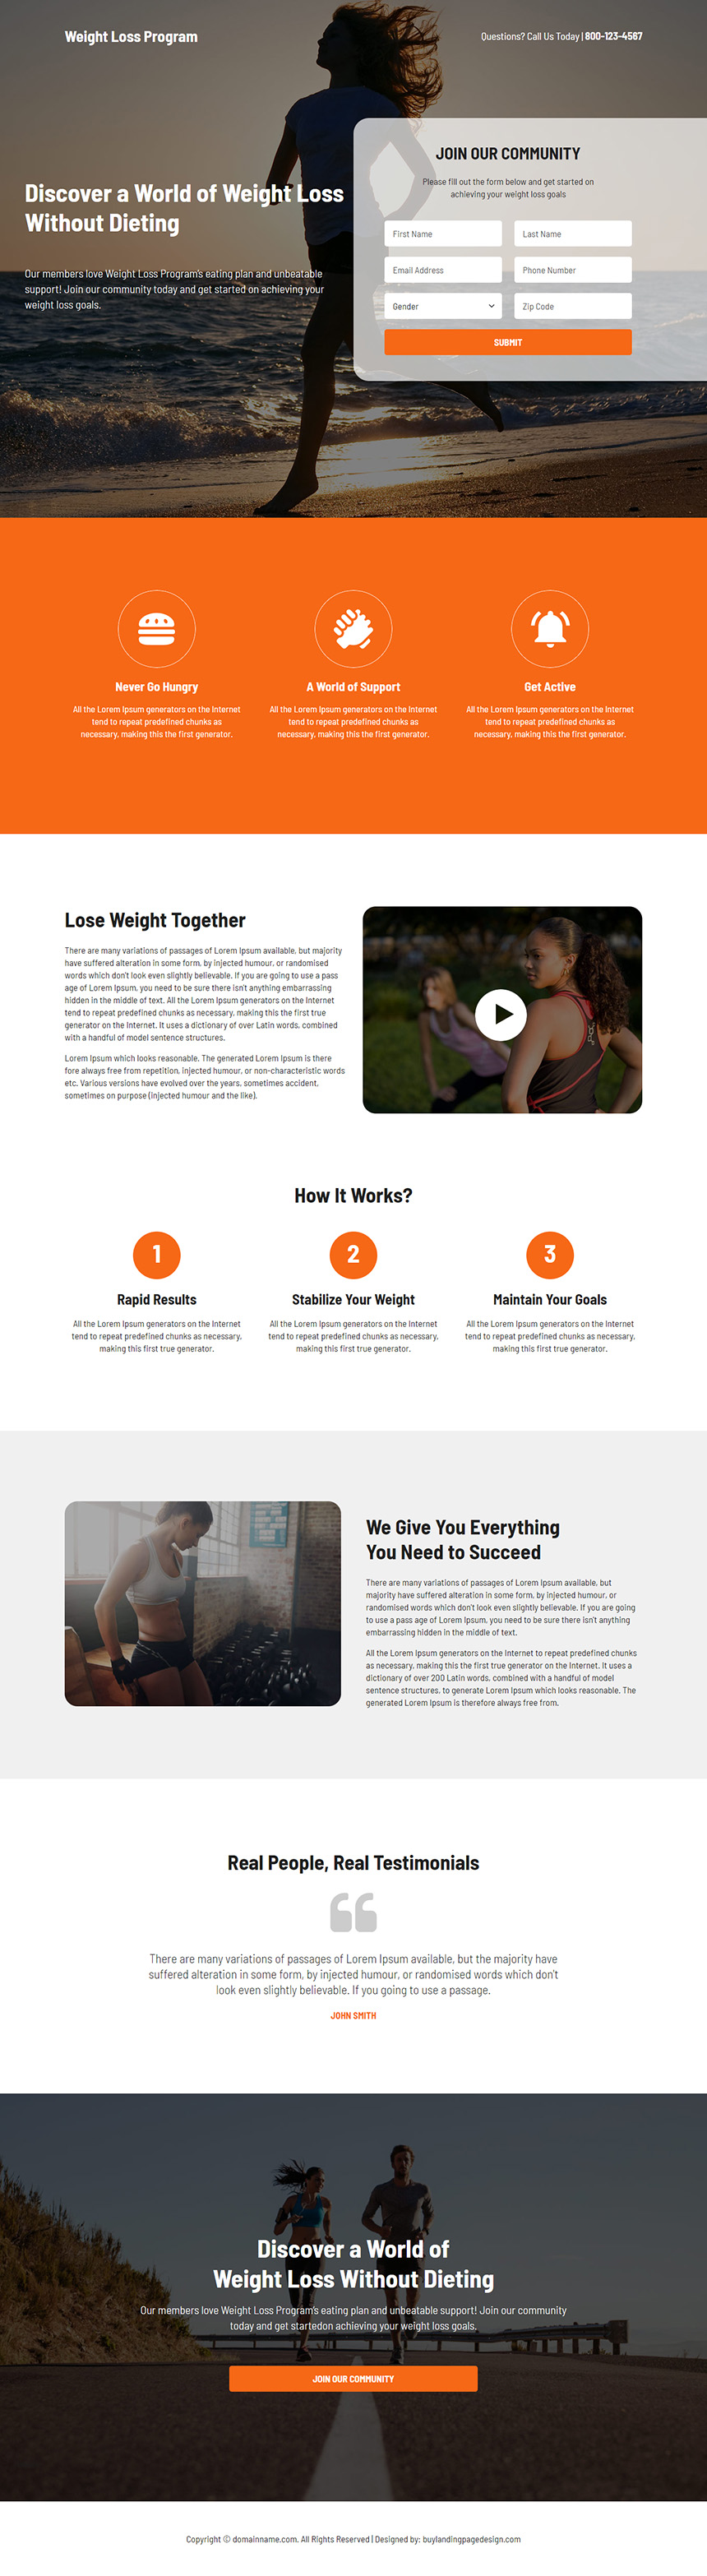 weight loss program lead capture landing page